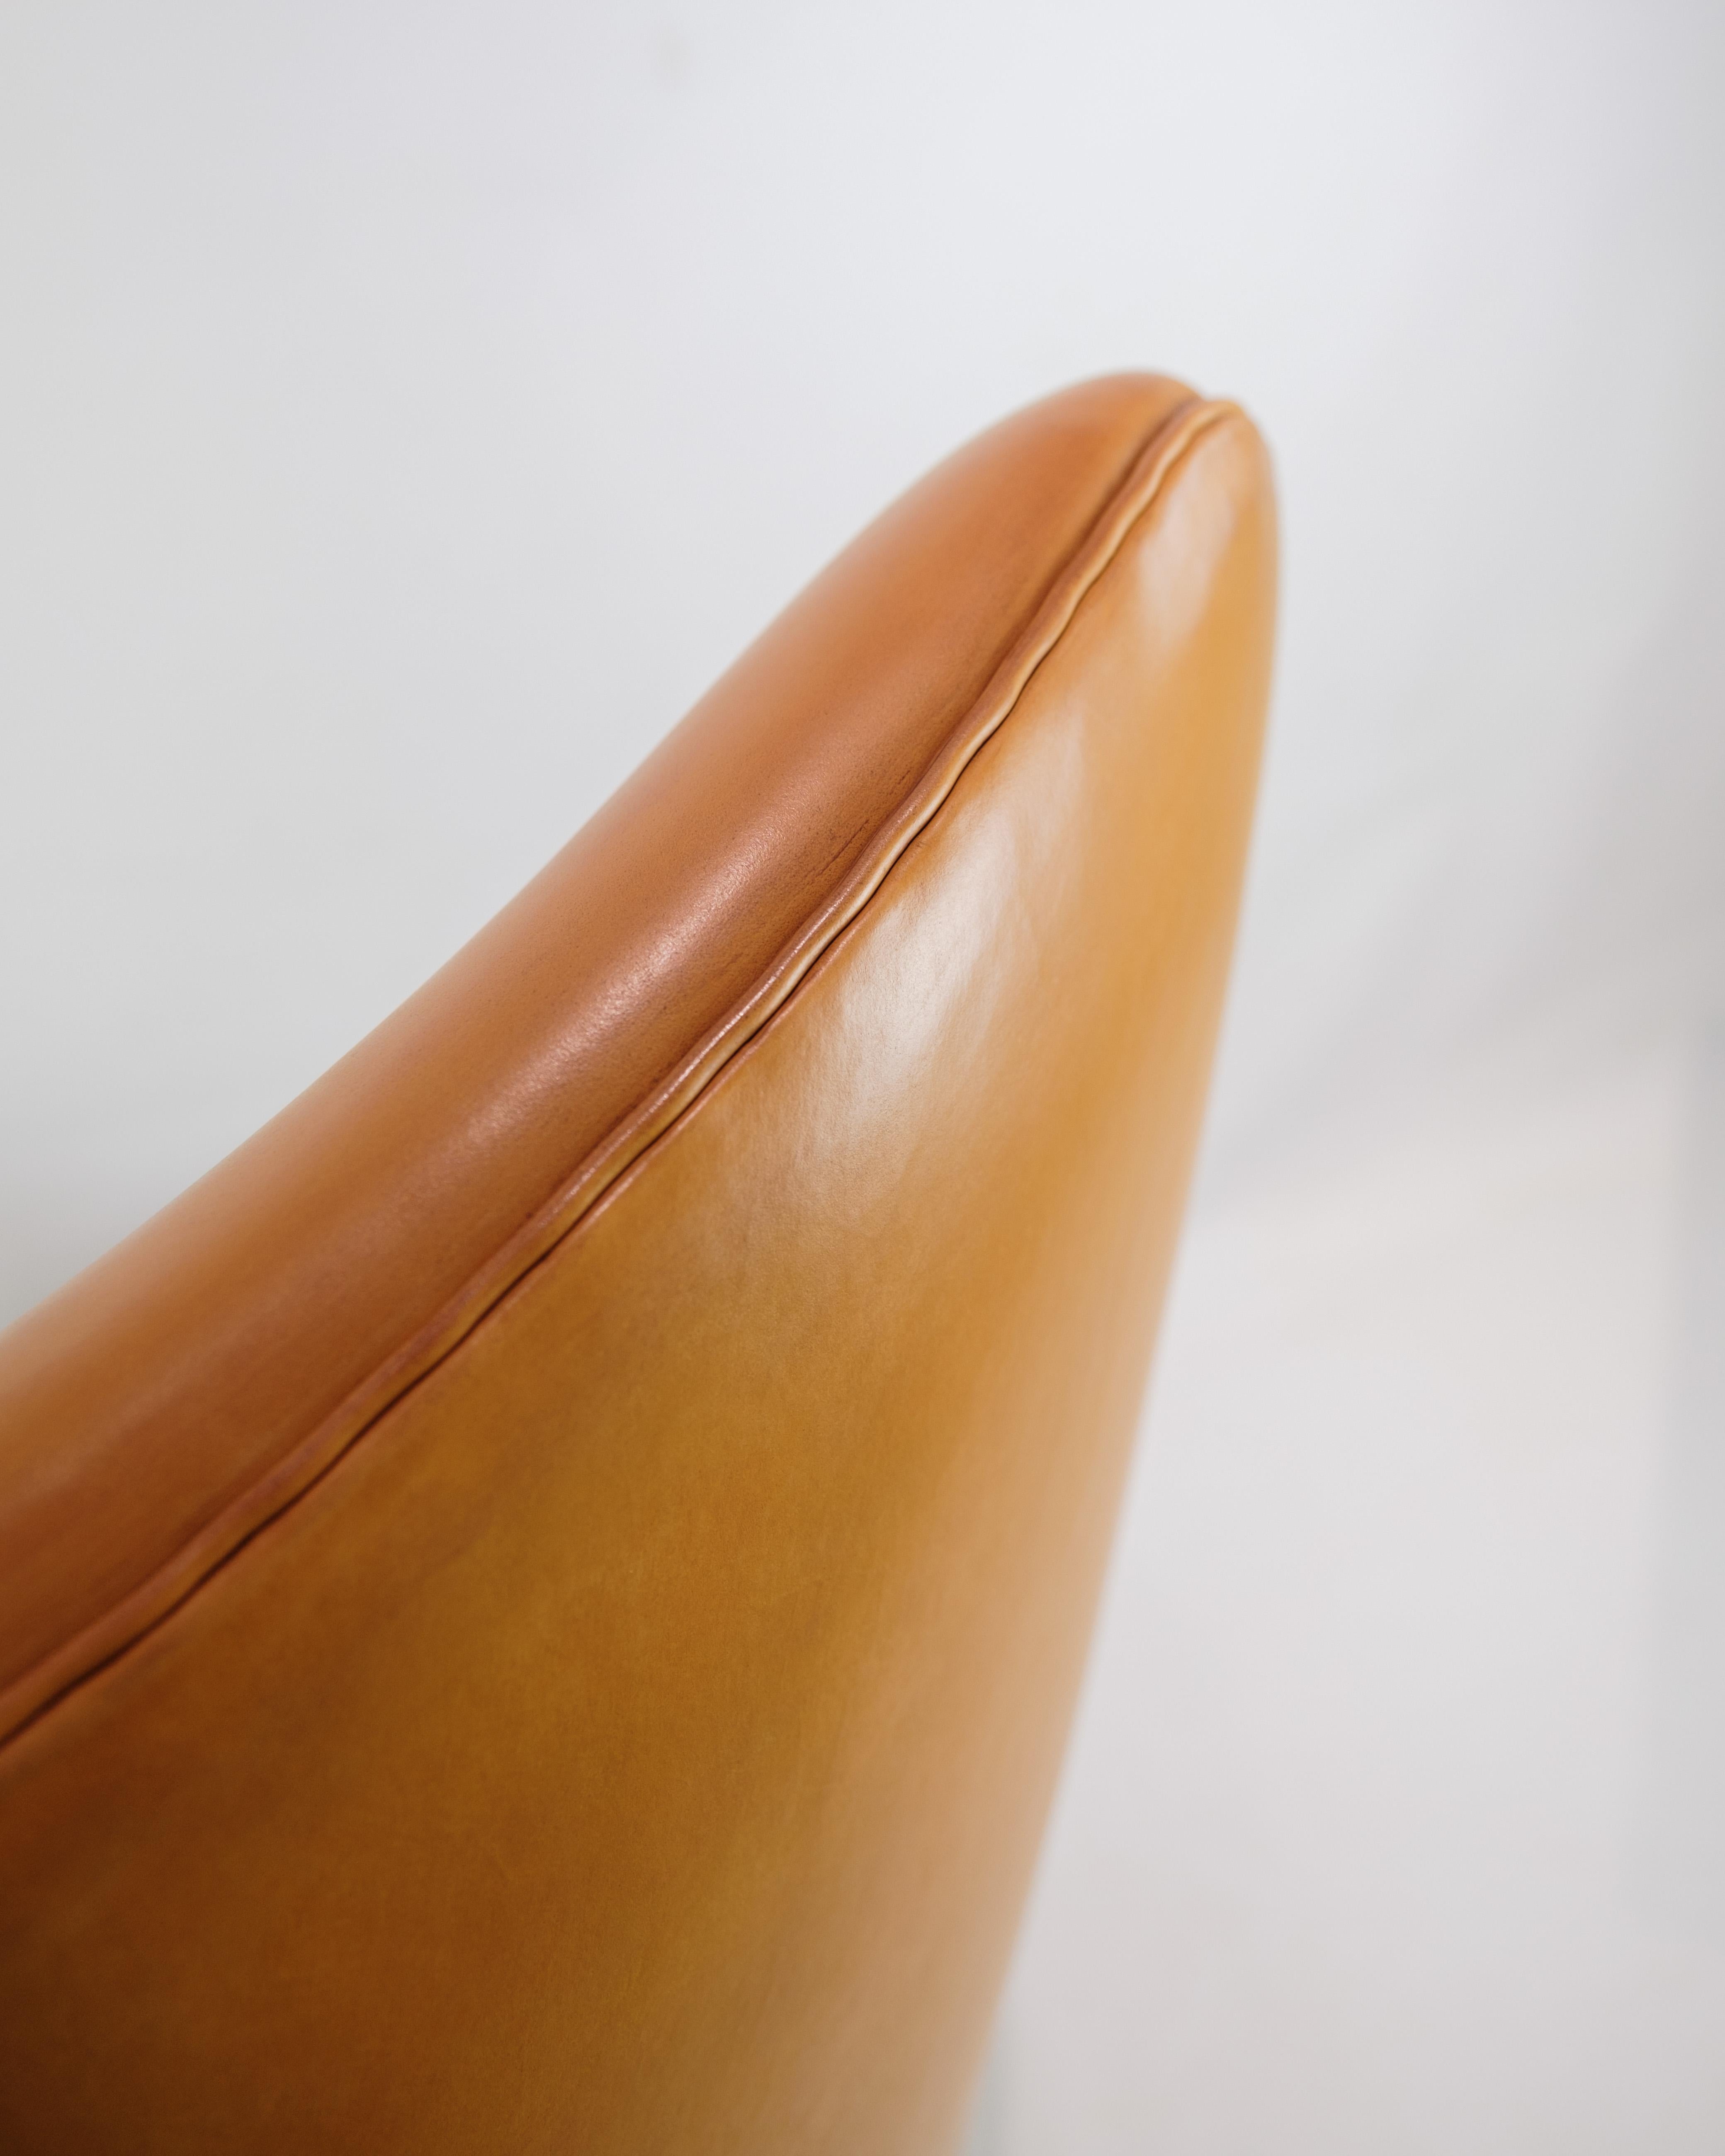 Contemporary The Egg Model 3316 Made In Cognac Elegance Leather By Arne Jacobsen From 2000s For Sale